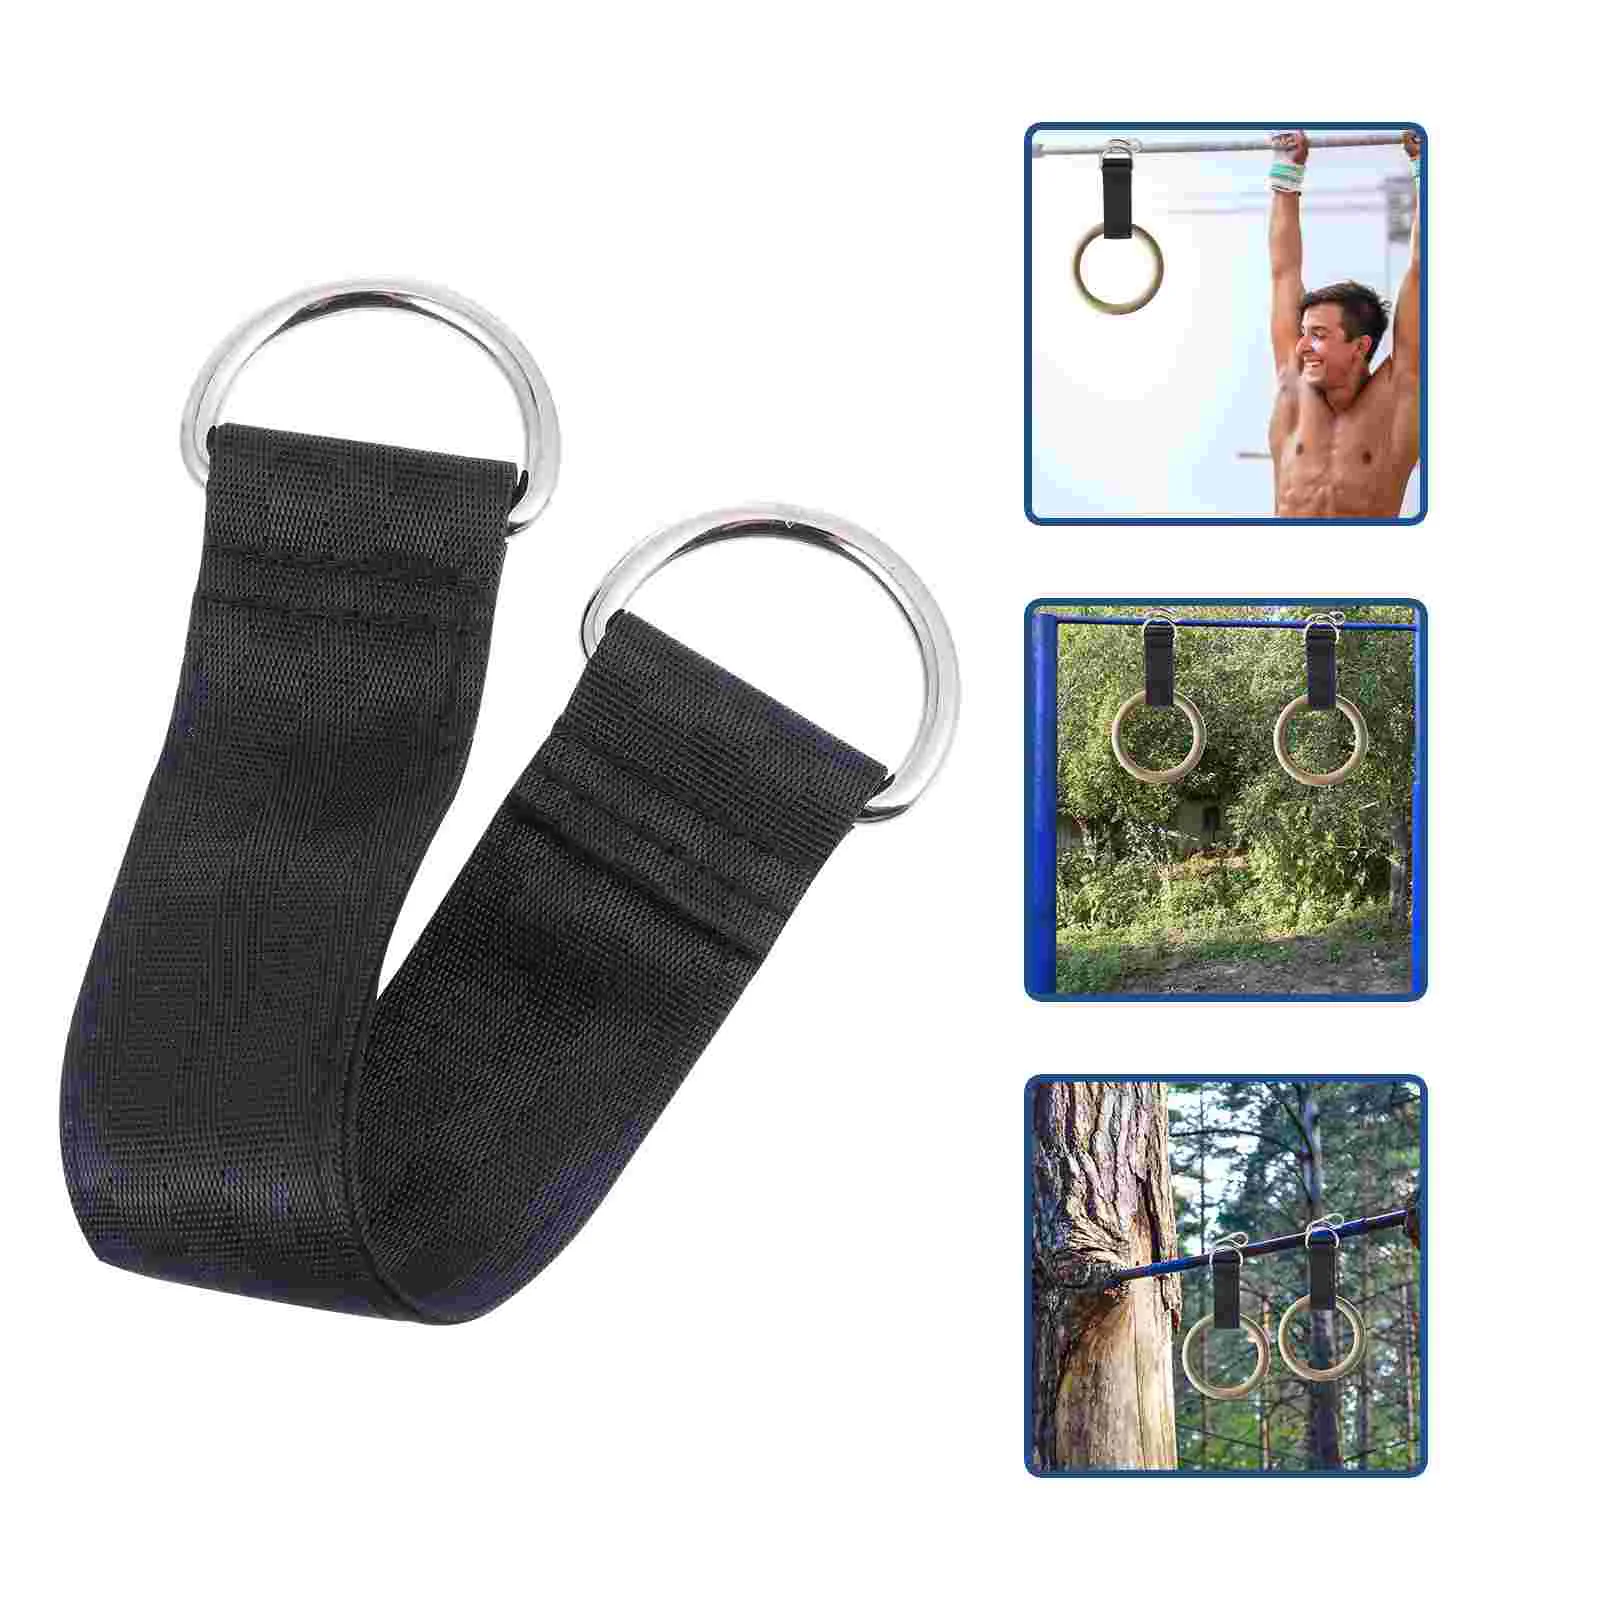 

Straps Hanging Strap Swing Fitness Belts Ab Ring Gymnastic Bands Training Sling Pullup Exercise Core Tree Up Bar Gym Indoor